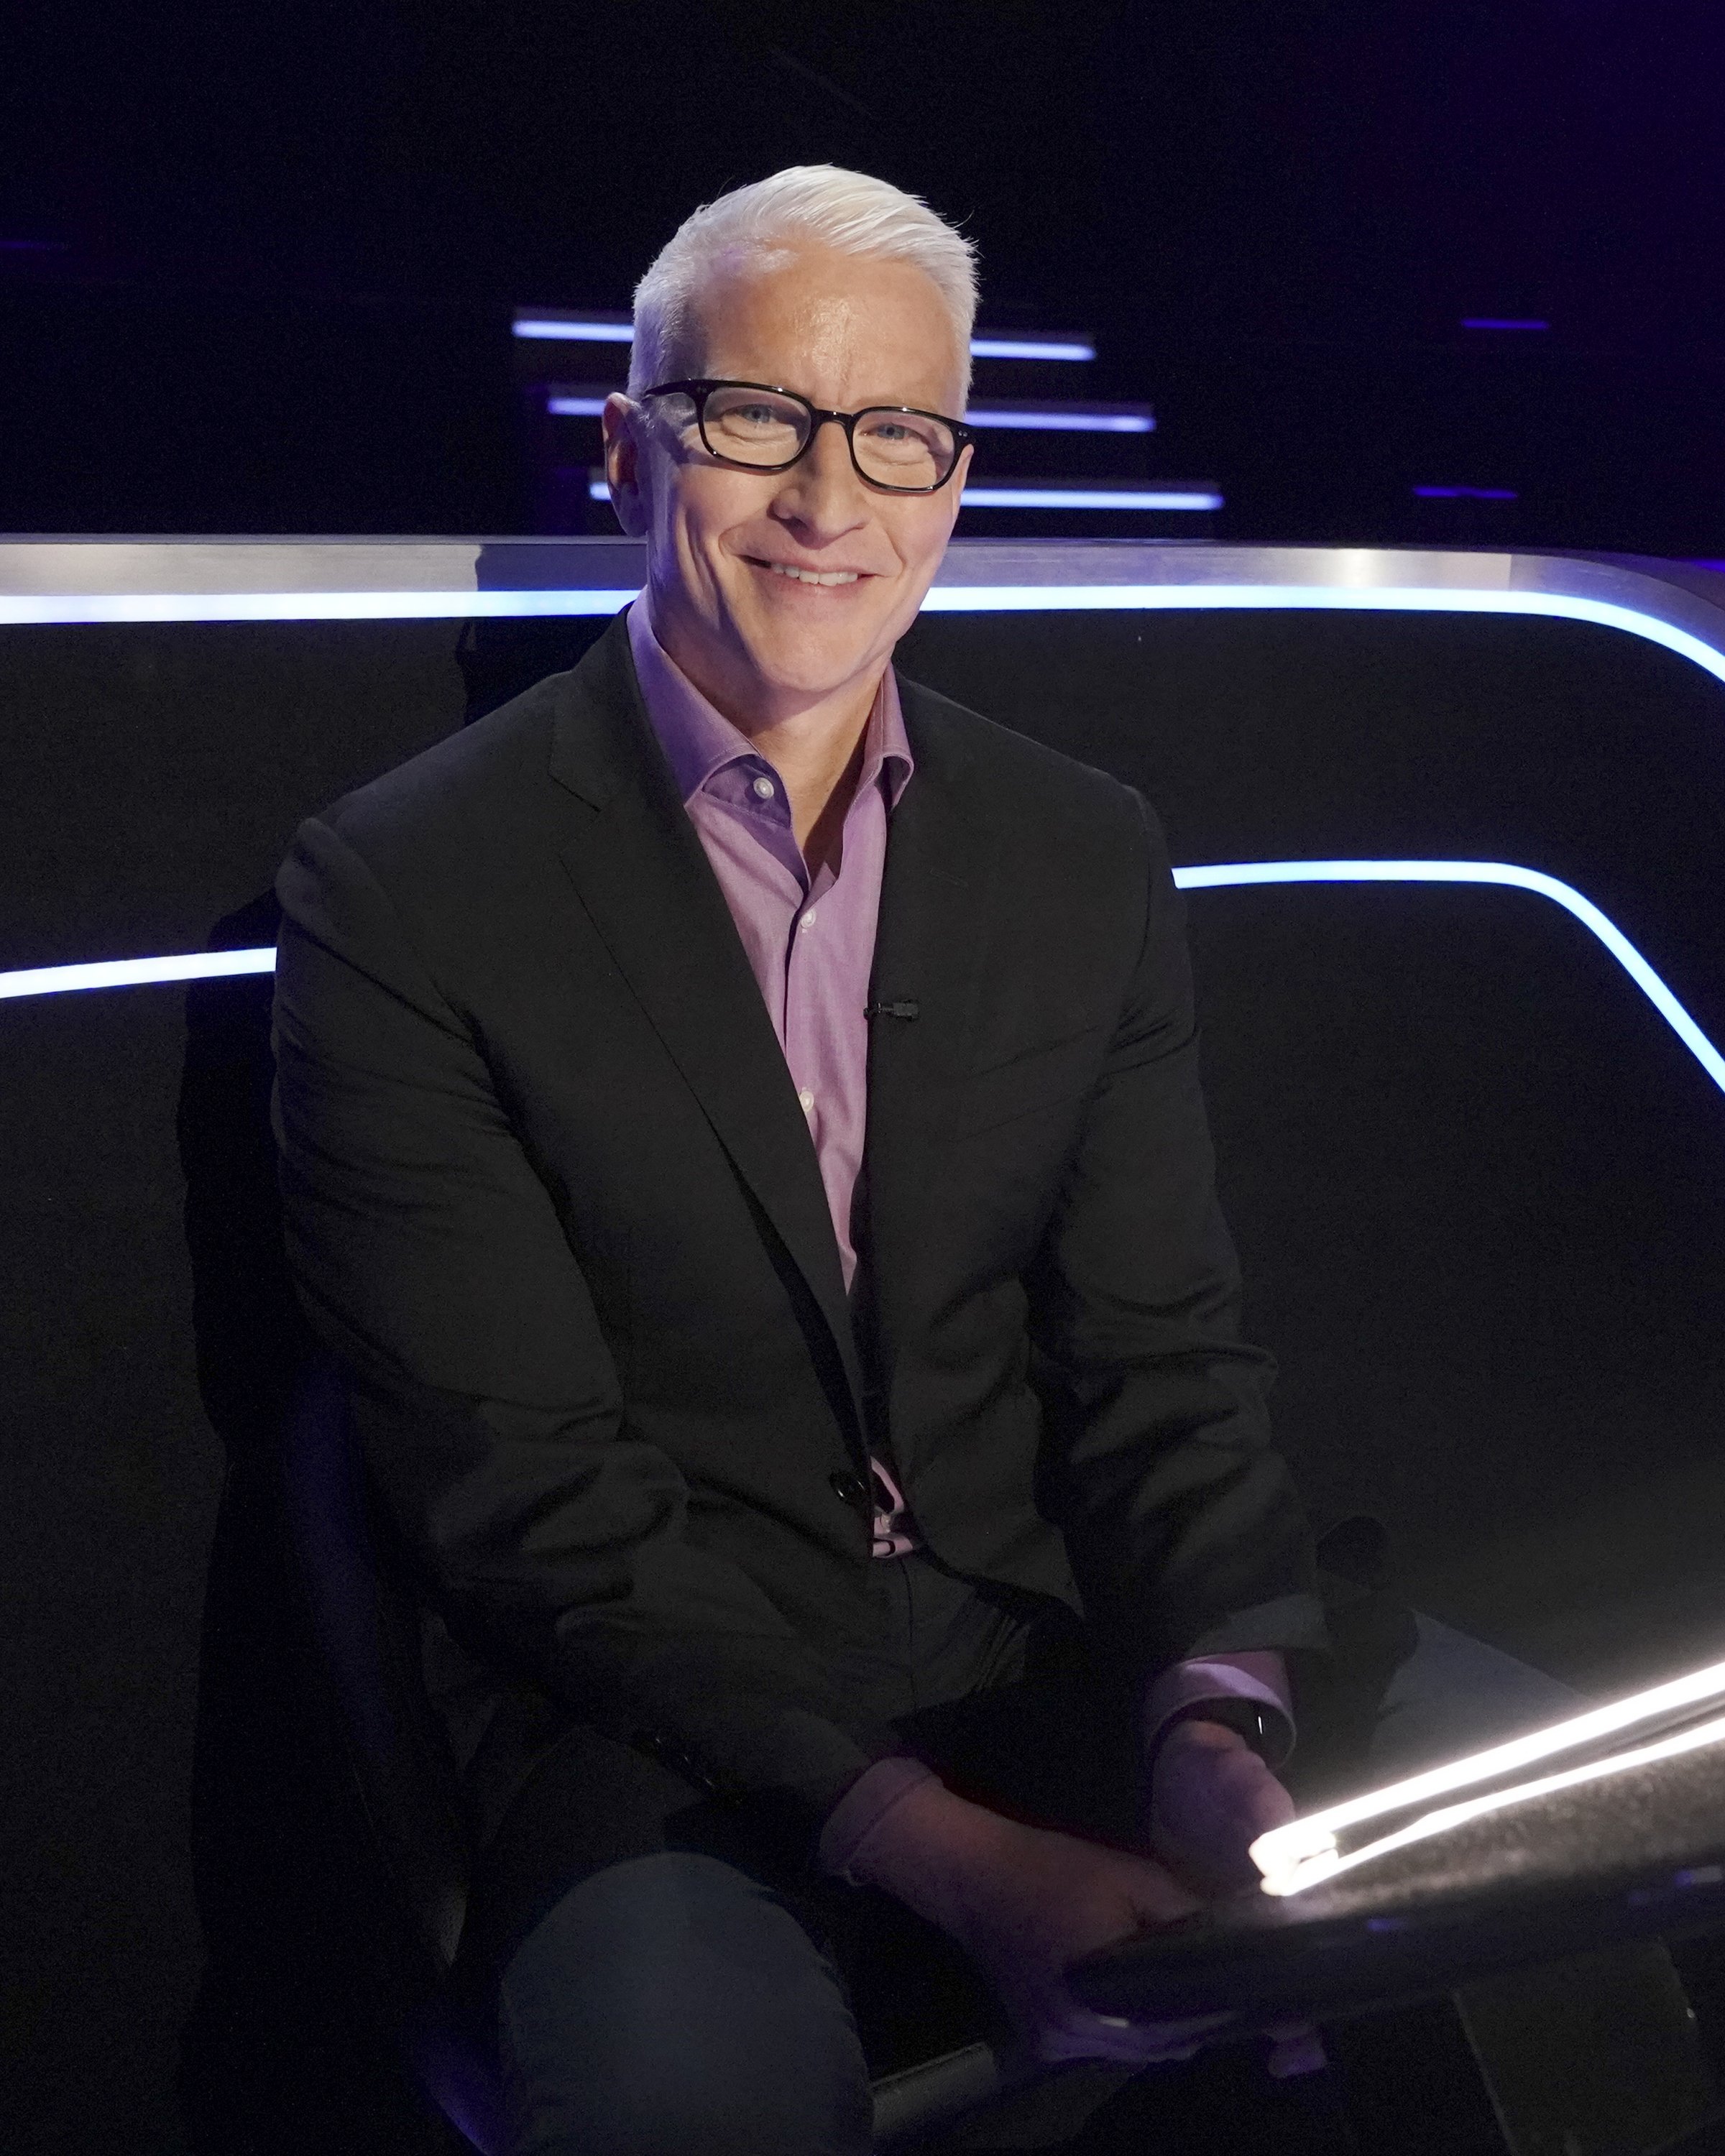 Anderson Cooper on "Who Wants To Be A Millionaire" on March 14, 2020. | Source: Getty Images.